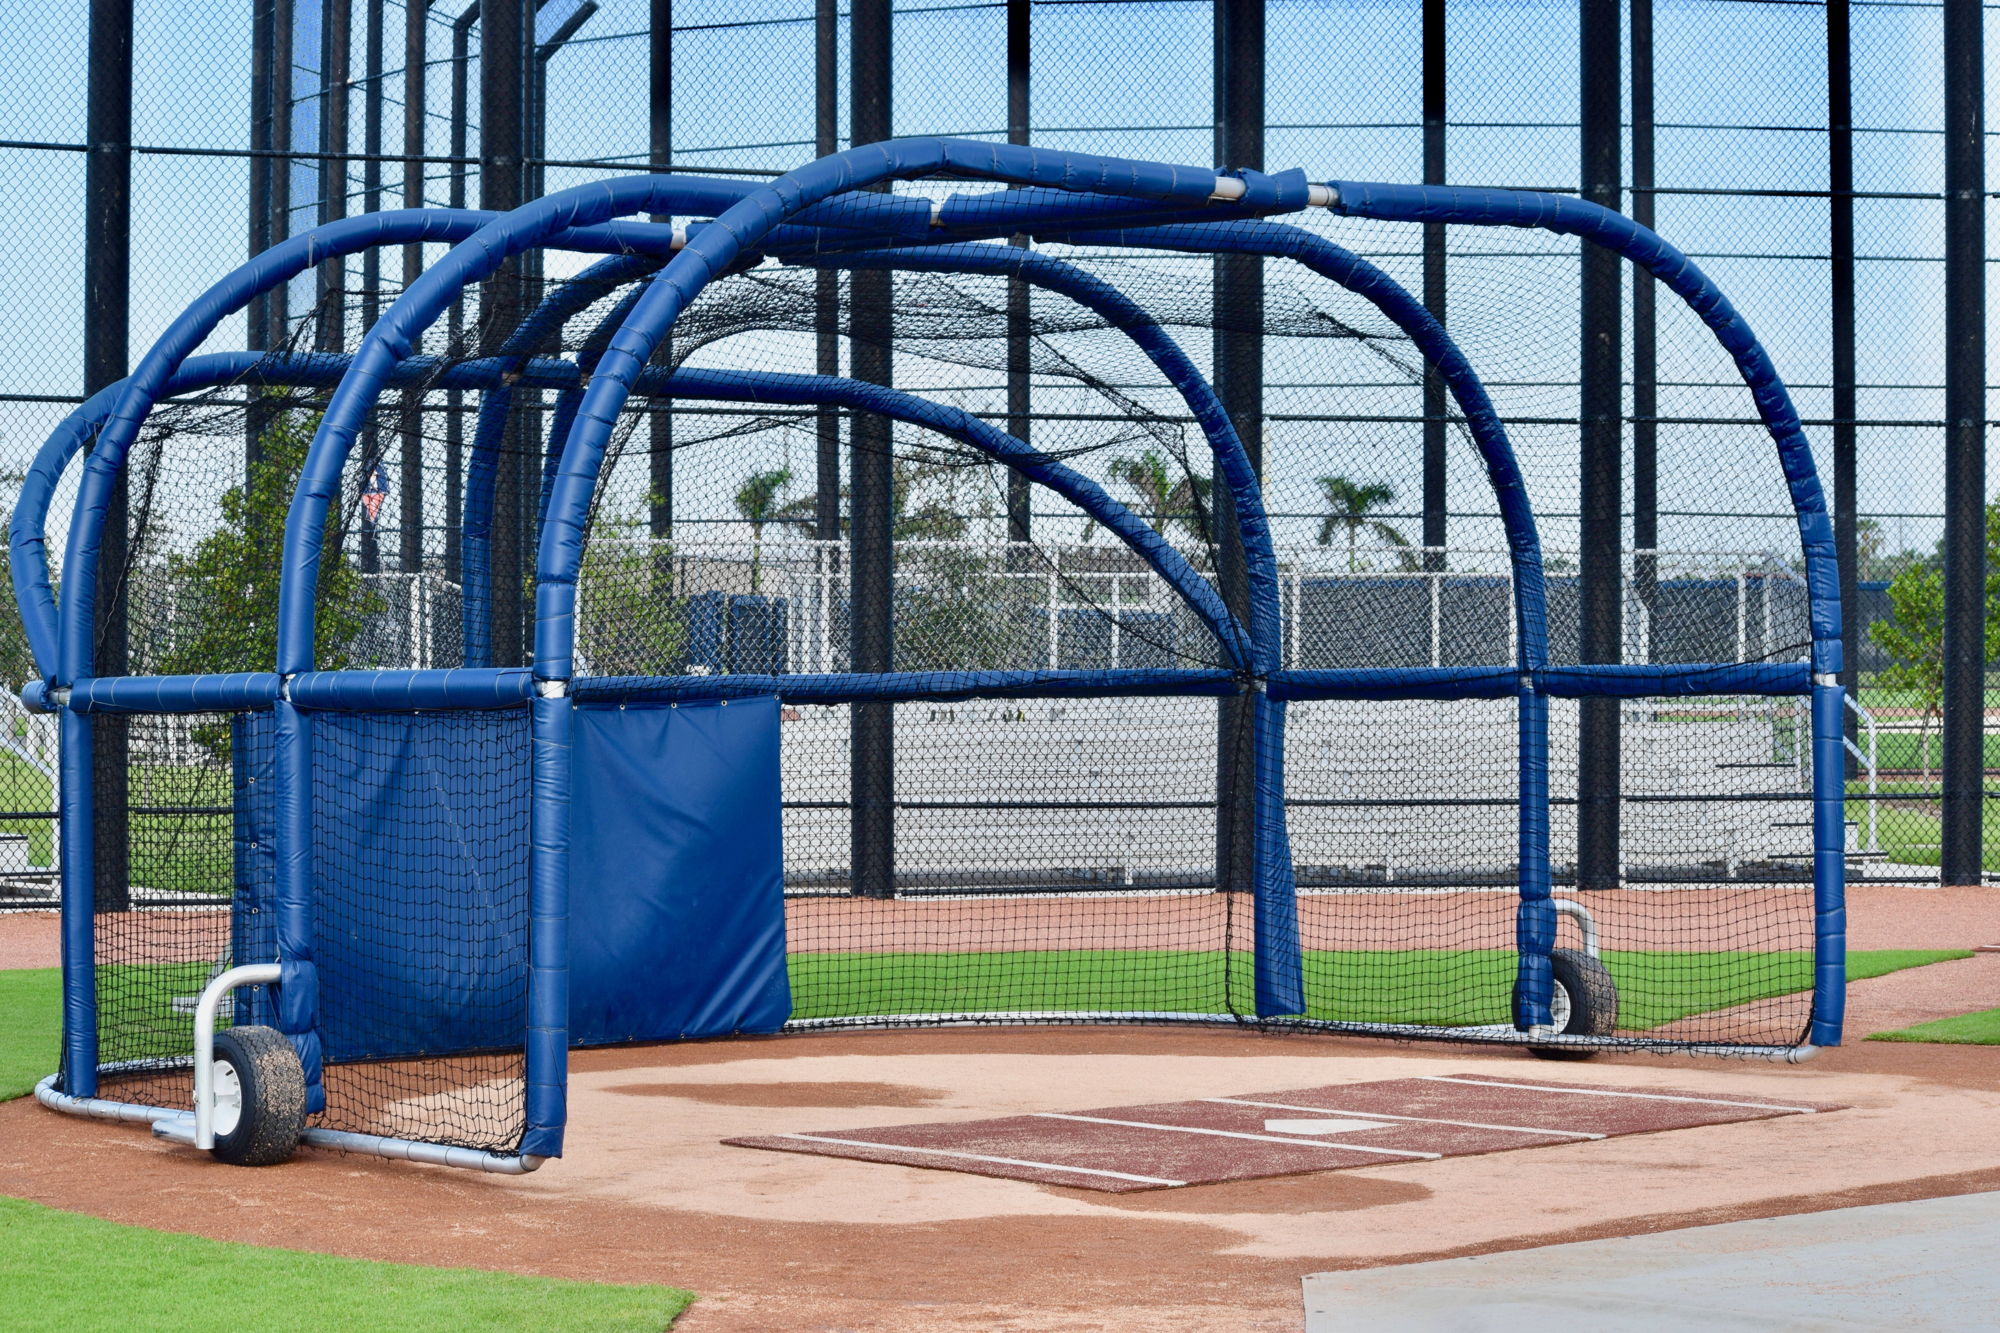 You can see the visiting team's batting cage from outside Guaranteed R